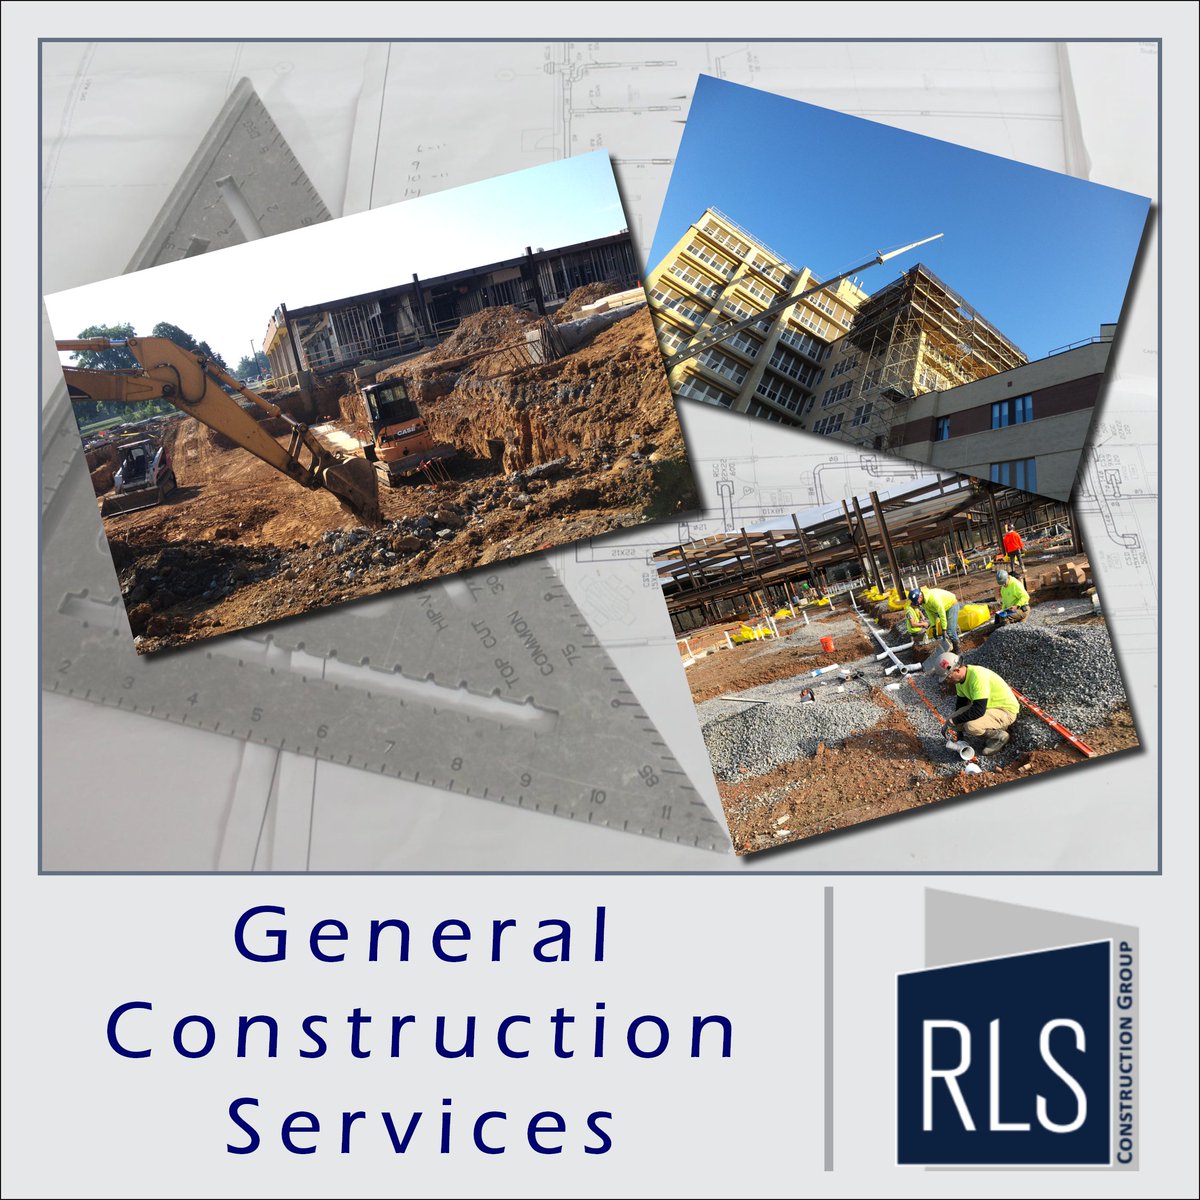 RLS is your trusted partner for general construction services from project start to final punch list. RLS will ensure that your project is your vision brought to life!

#GovernementConstruction #InstitutionalConstruction #CommercialConstruction #GeneralConstruction #SDVOSB